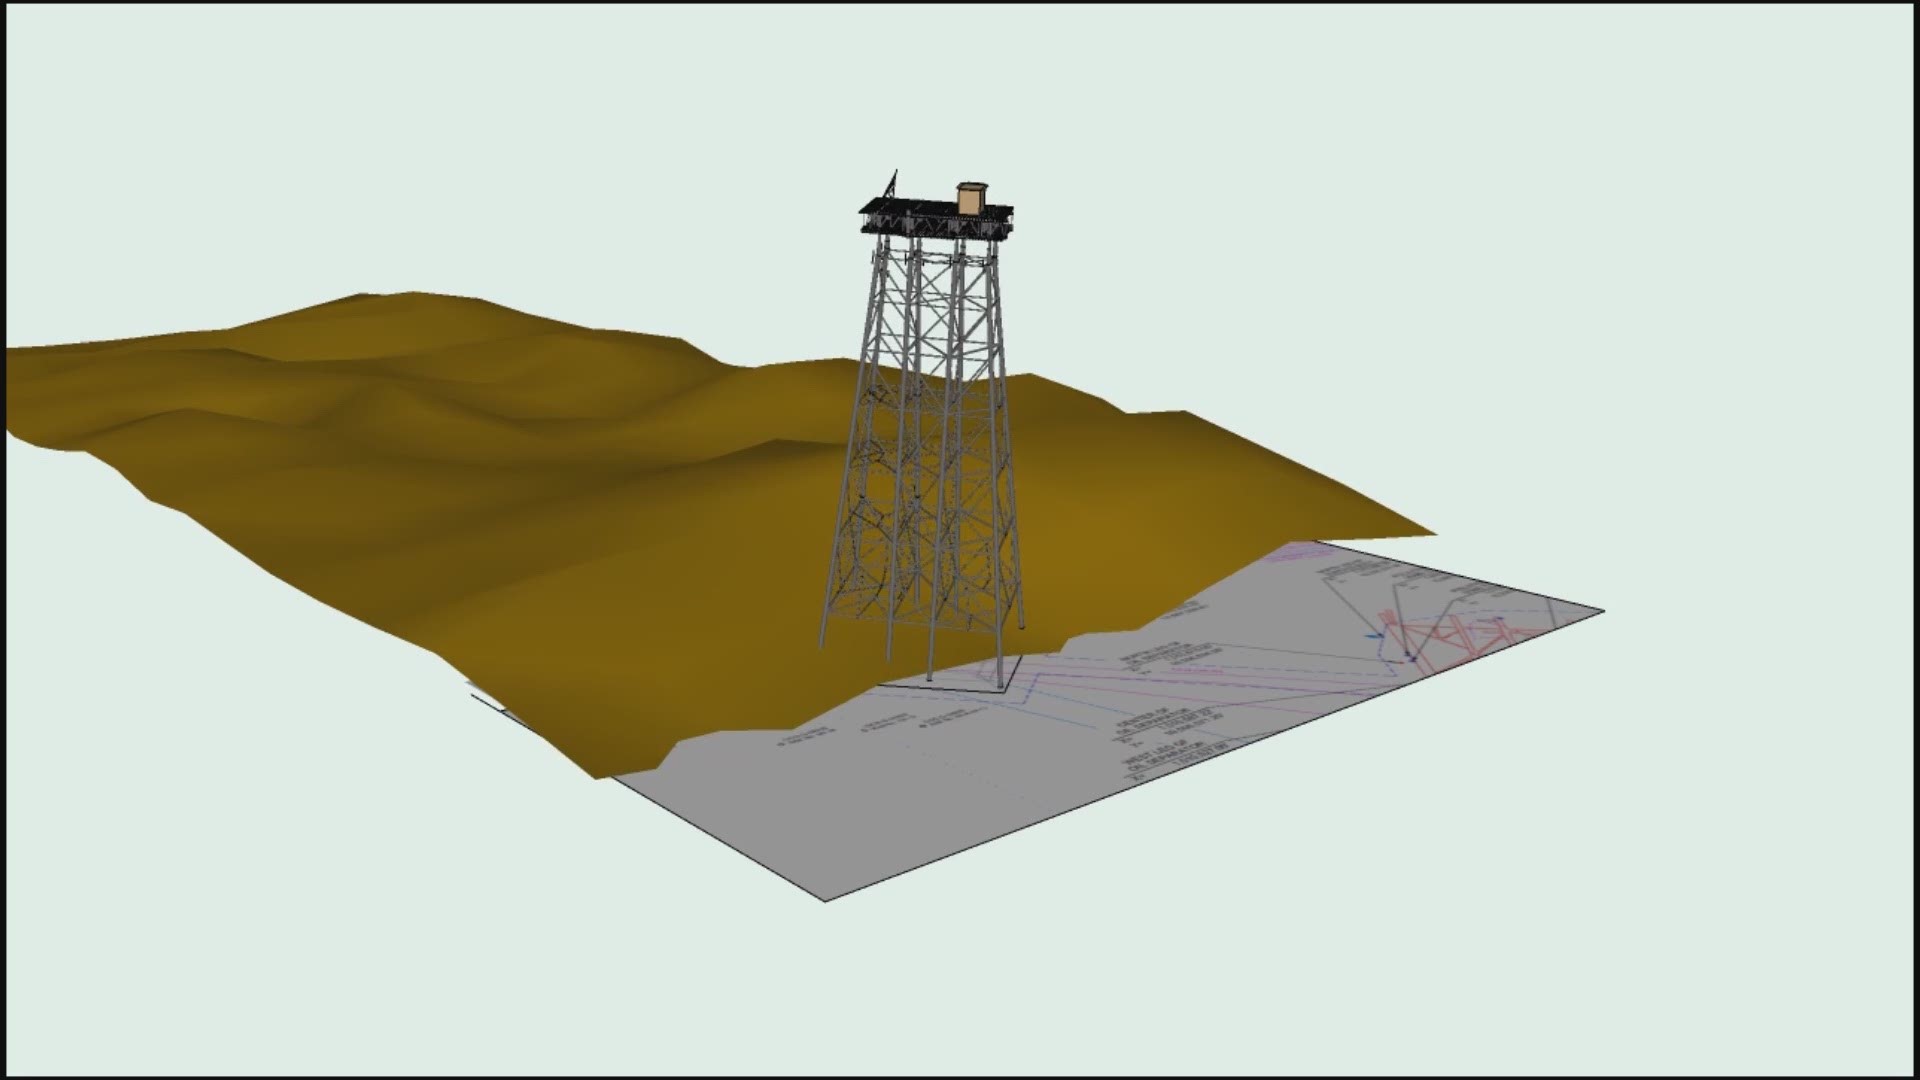 An animation released by a U.S. Coast Guard contractor shows a simulation of the Taylor Energy platform being toppled over by a mudslide in 2004, the incident that started the oil leak.